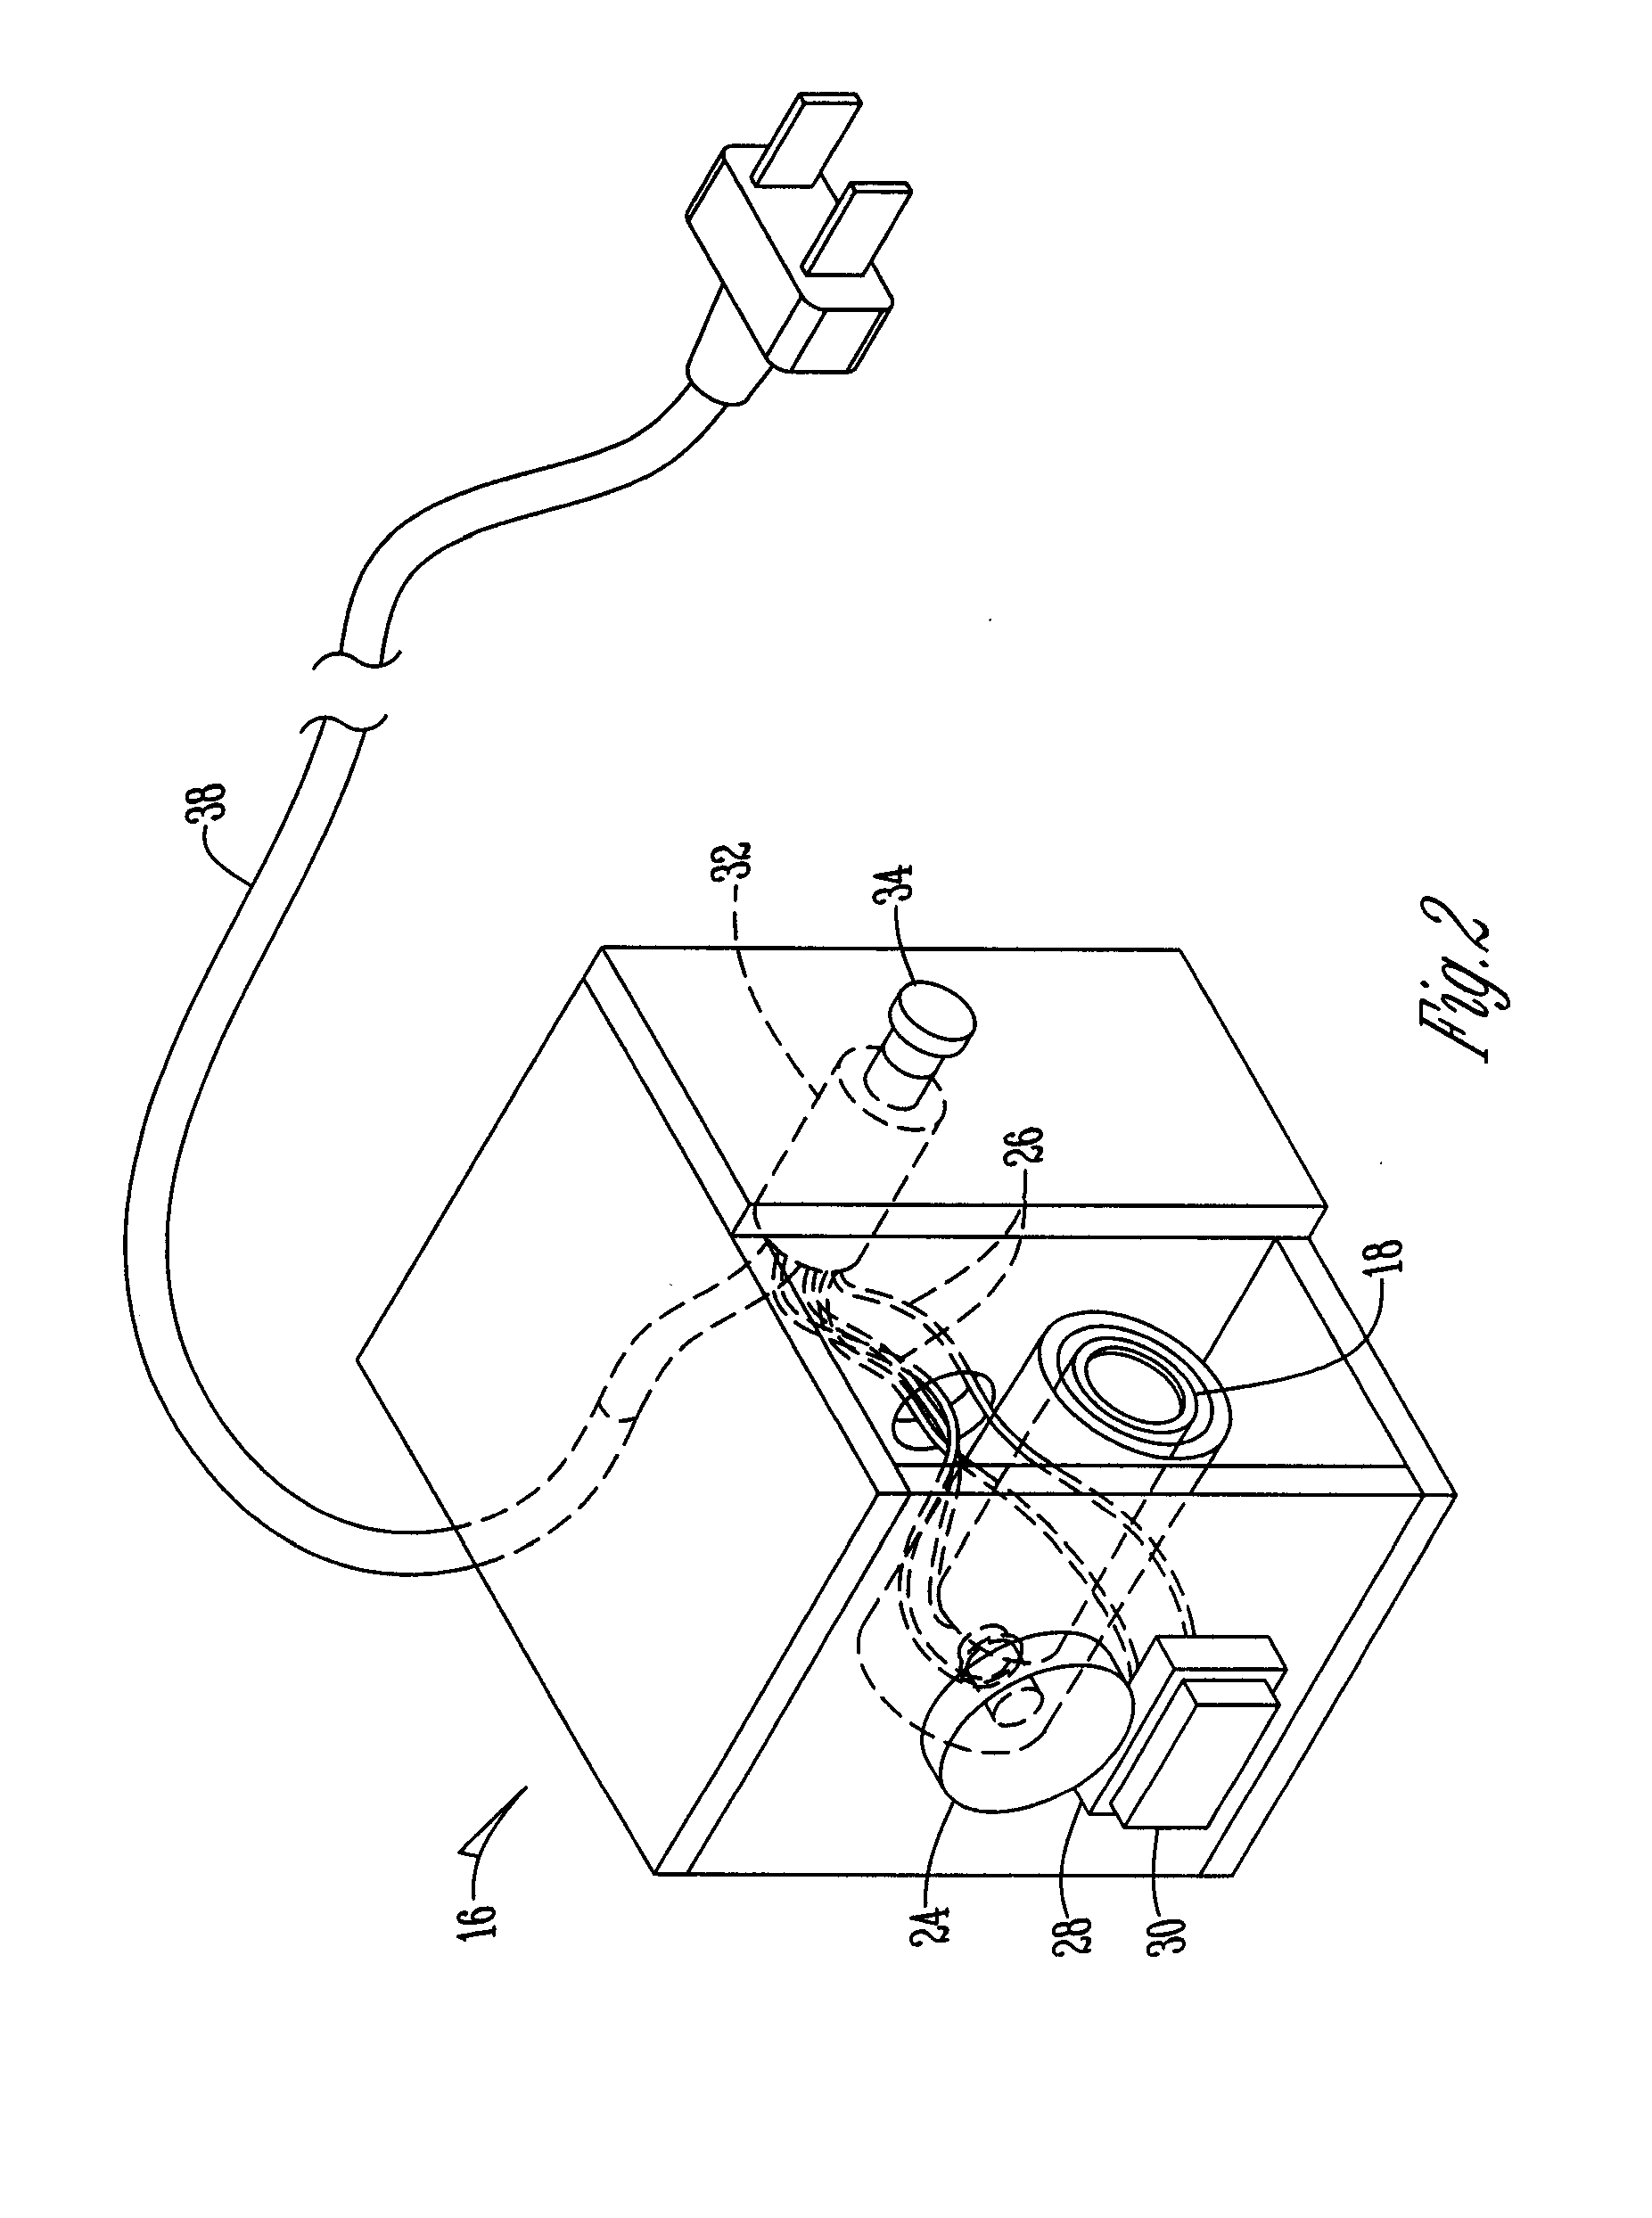 Method of providing a dart line for a dartboard and apparatus for producing the same